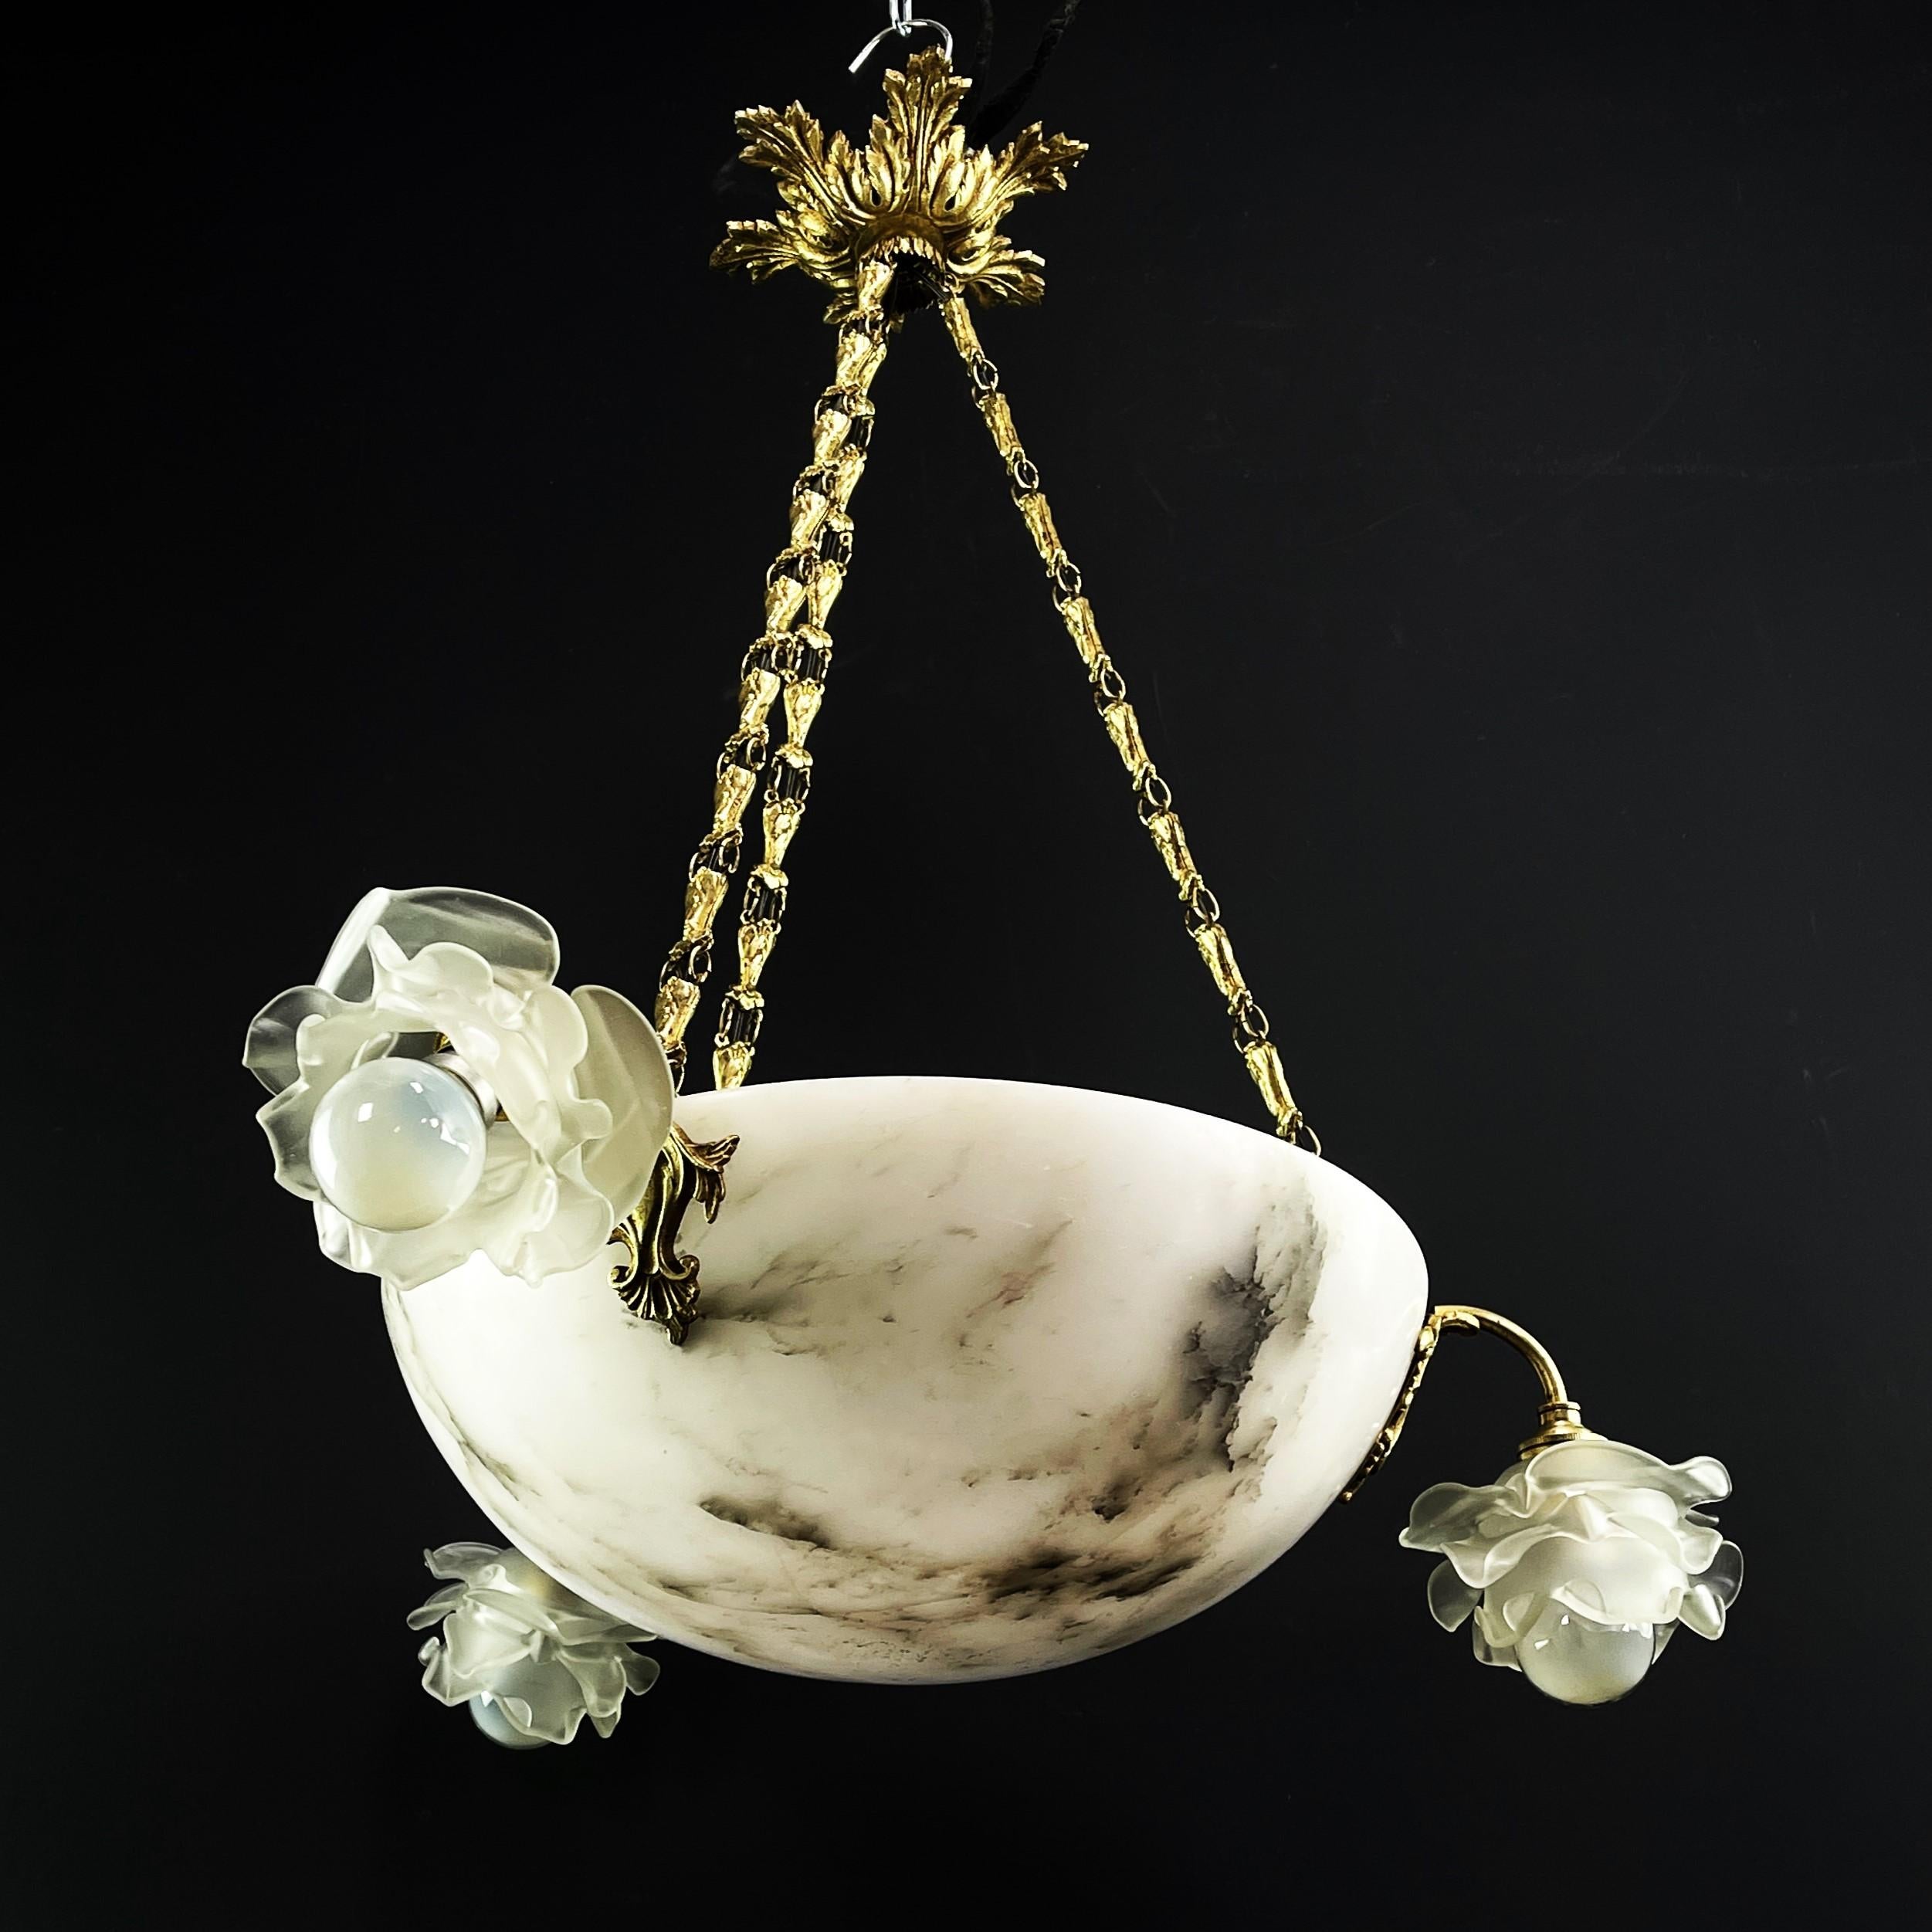 Art Deco chandeliers bronze lamp alabaster bowl, 1920s

This original pendant lamp impresses with its design. The lamp provides a very pleasant light. This ceiling lamp is an absolute design classic from the ART DECOS period. The large alabaster